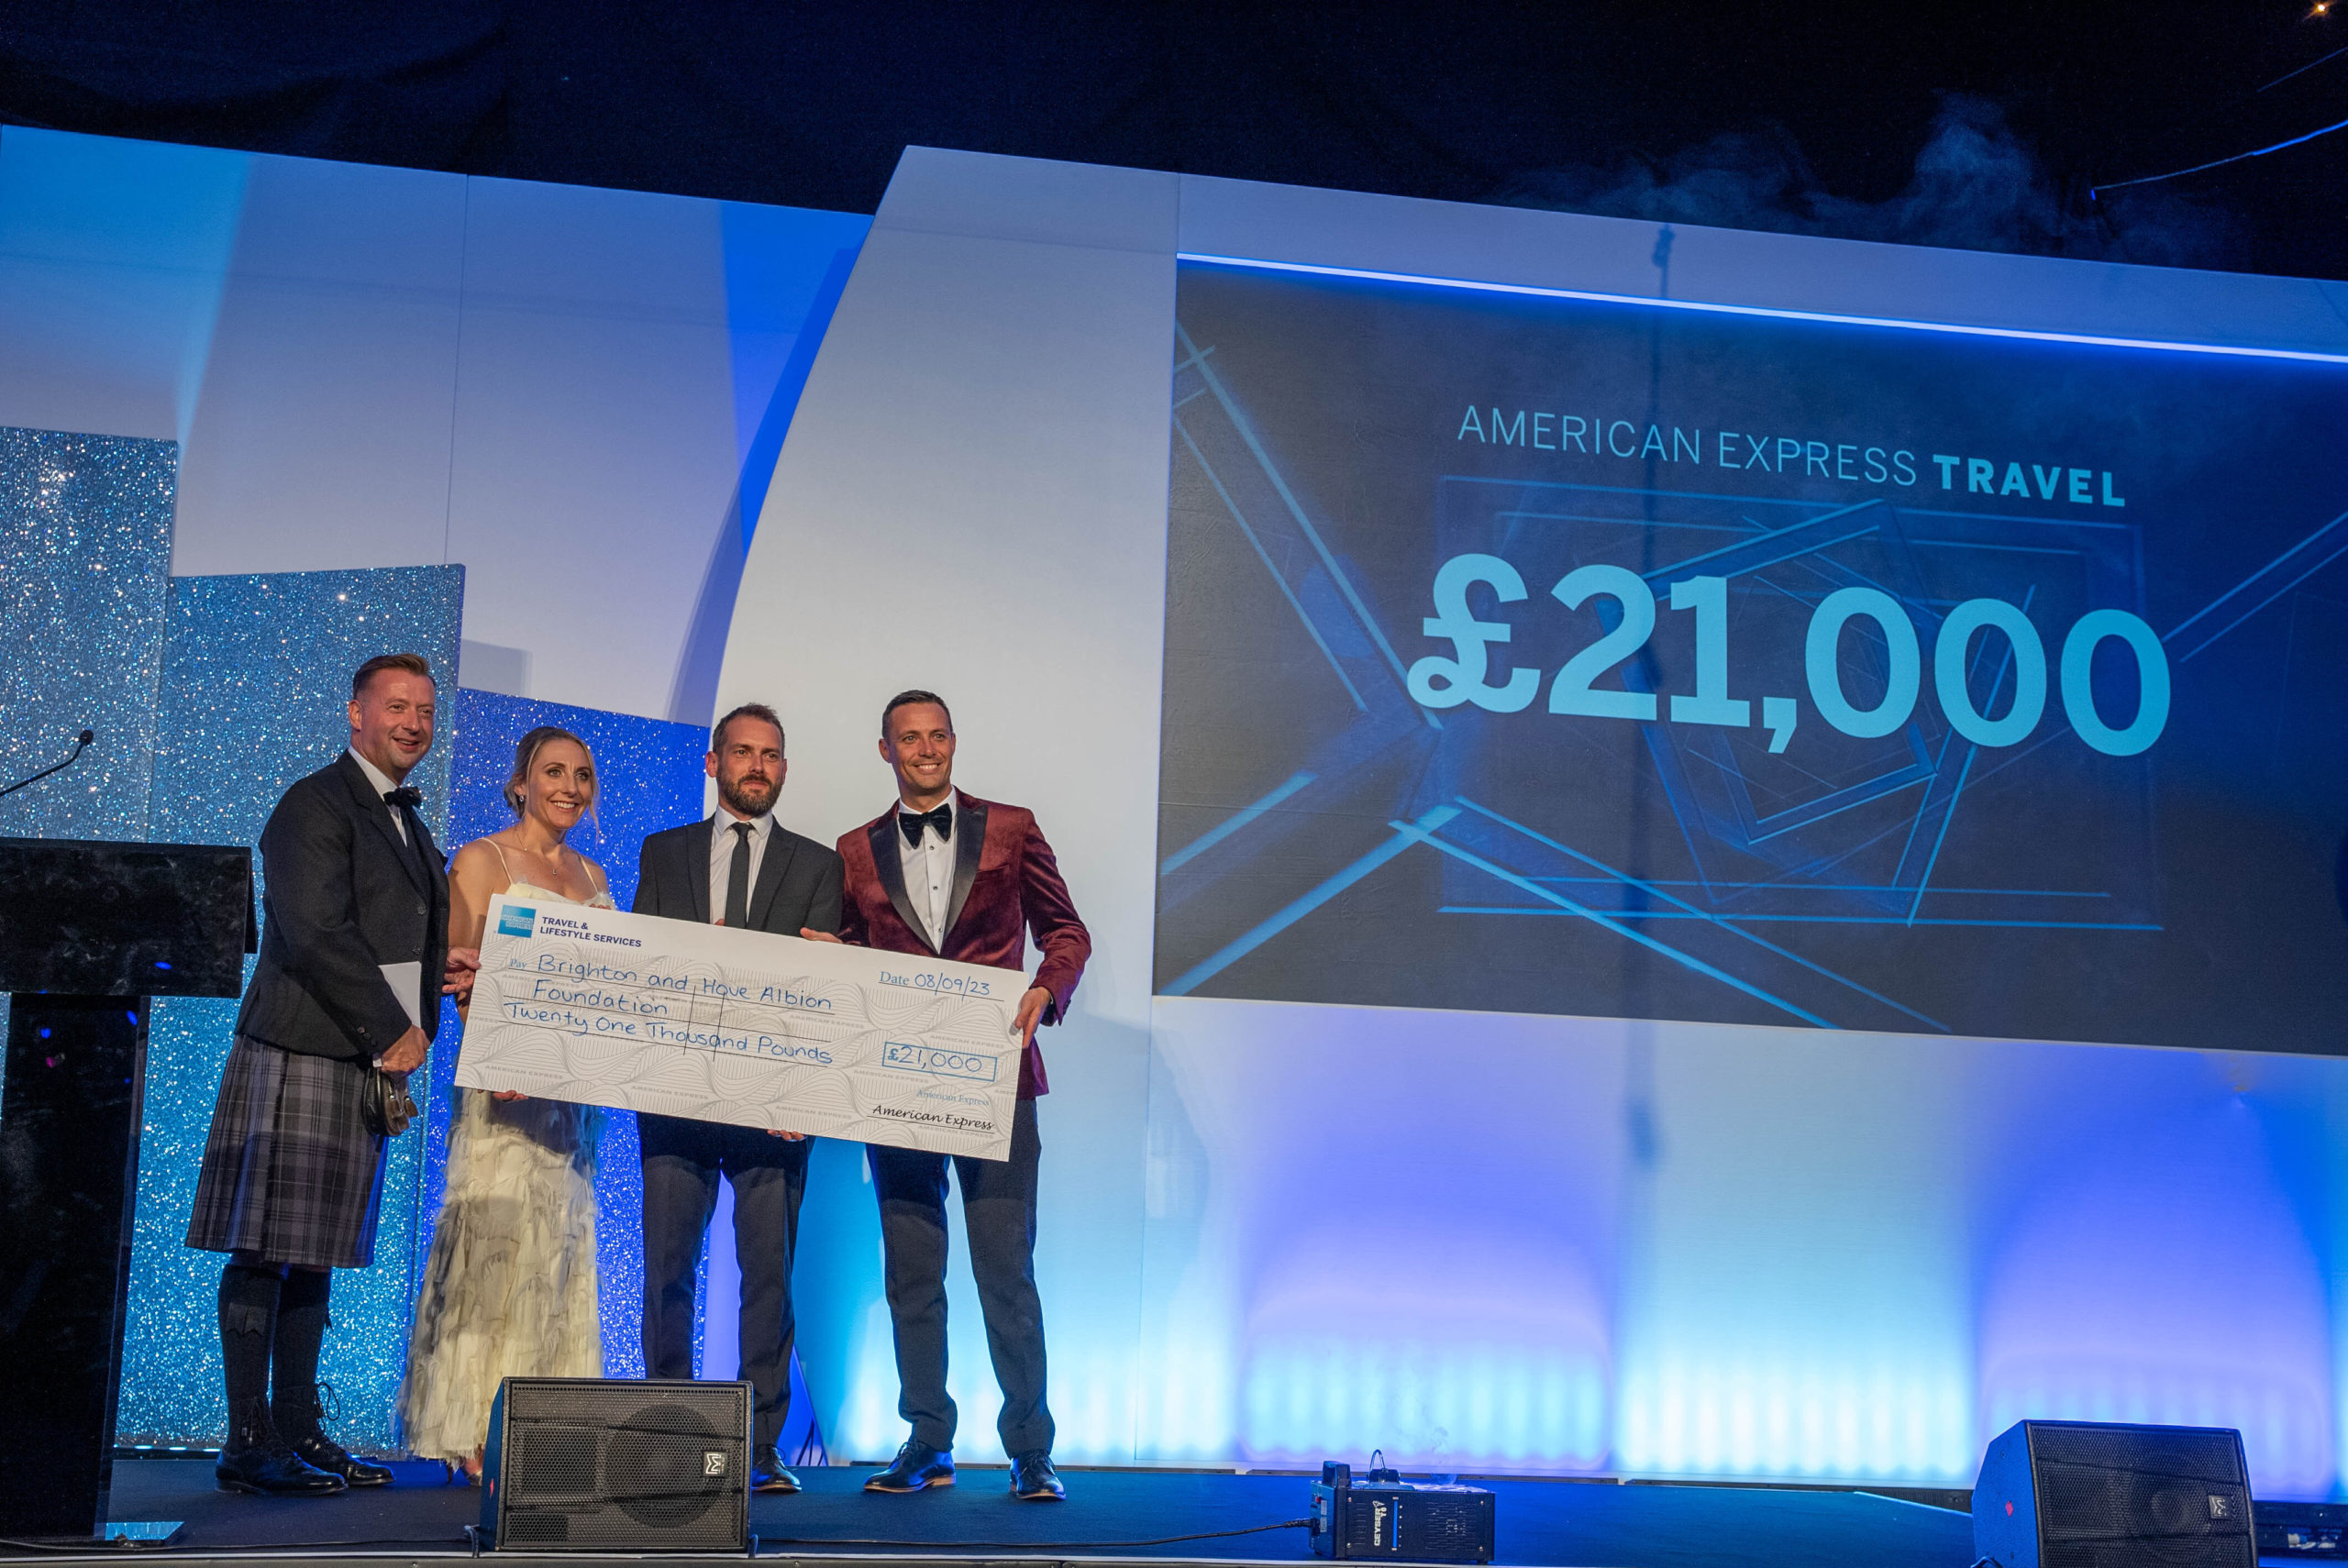 American Express raises over £27k for the Foundation